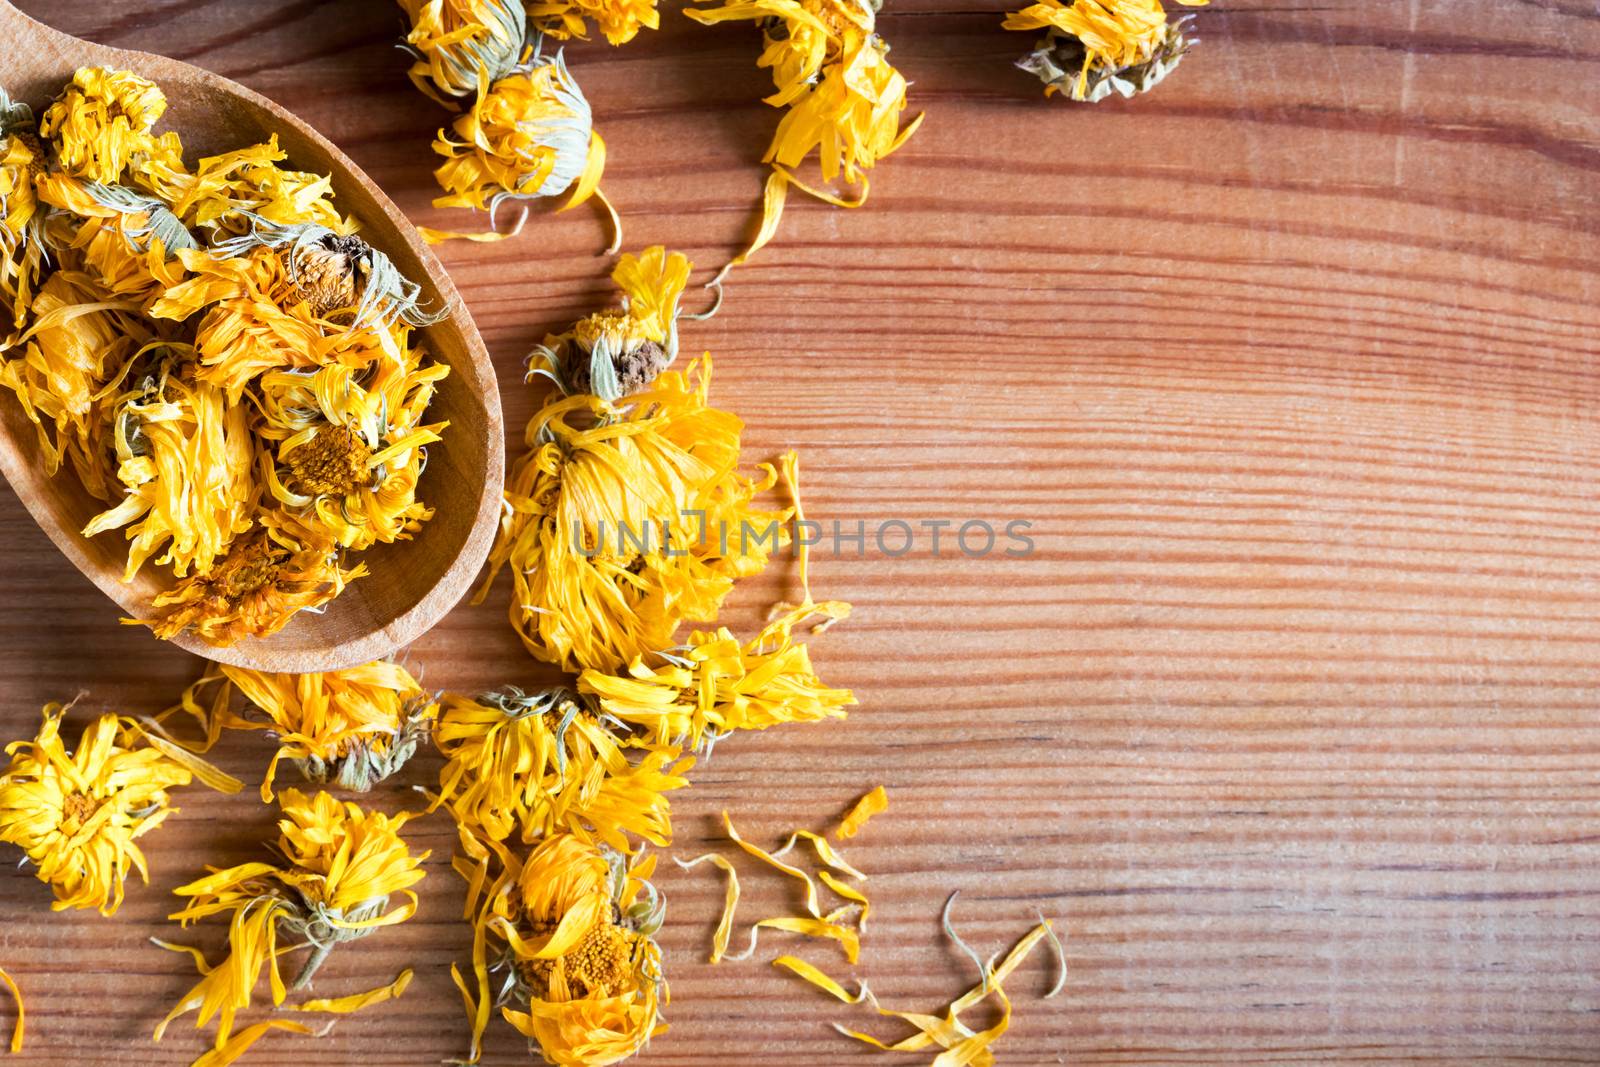 Dried calendula flowers on a wooden spoon with copy space